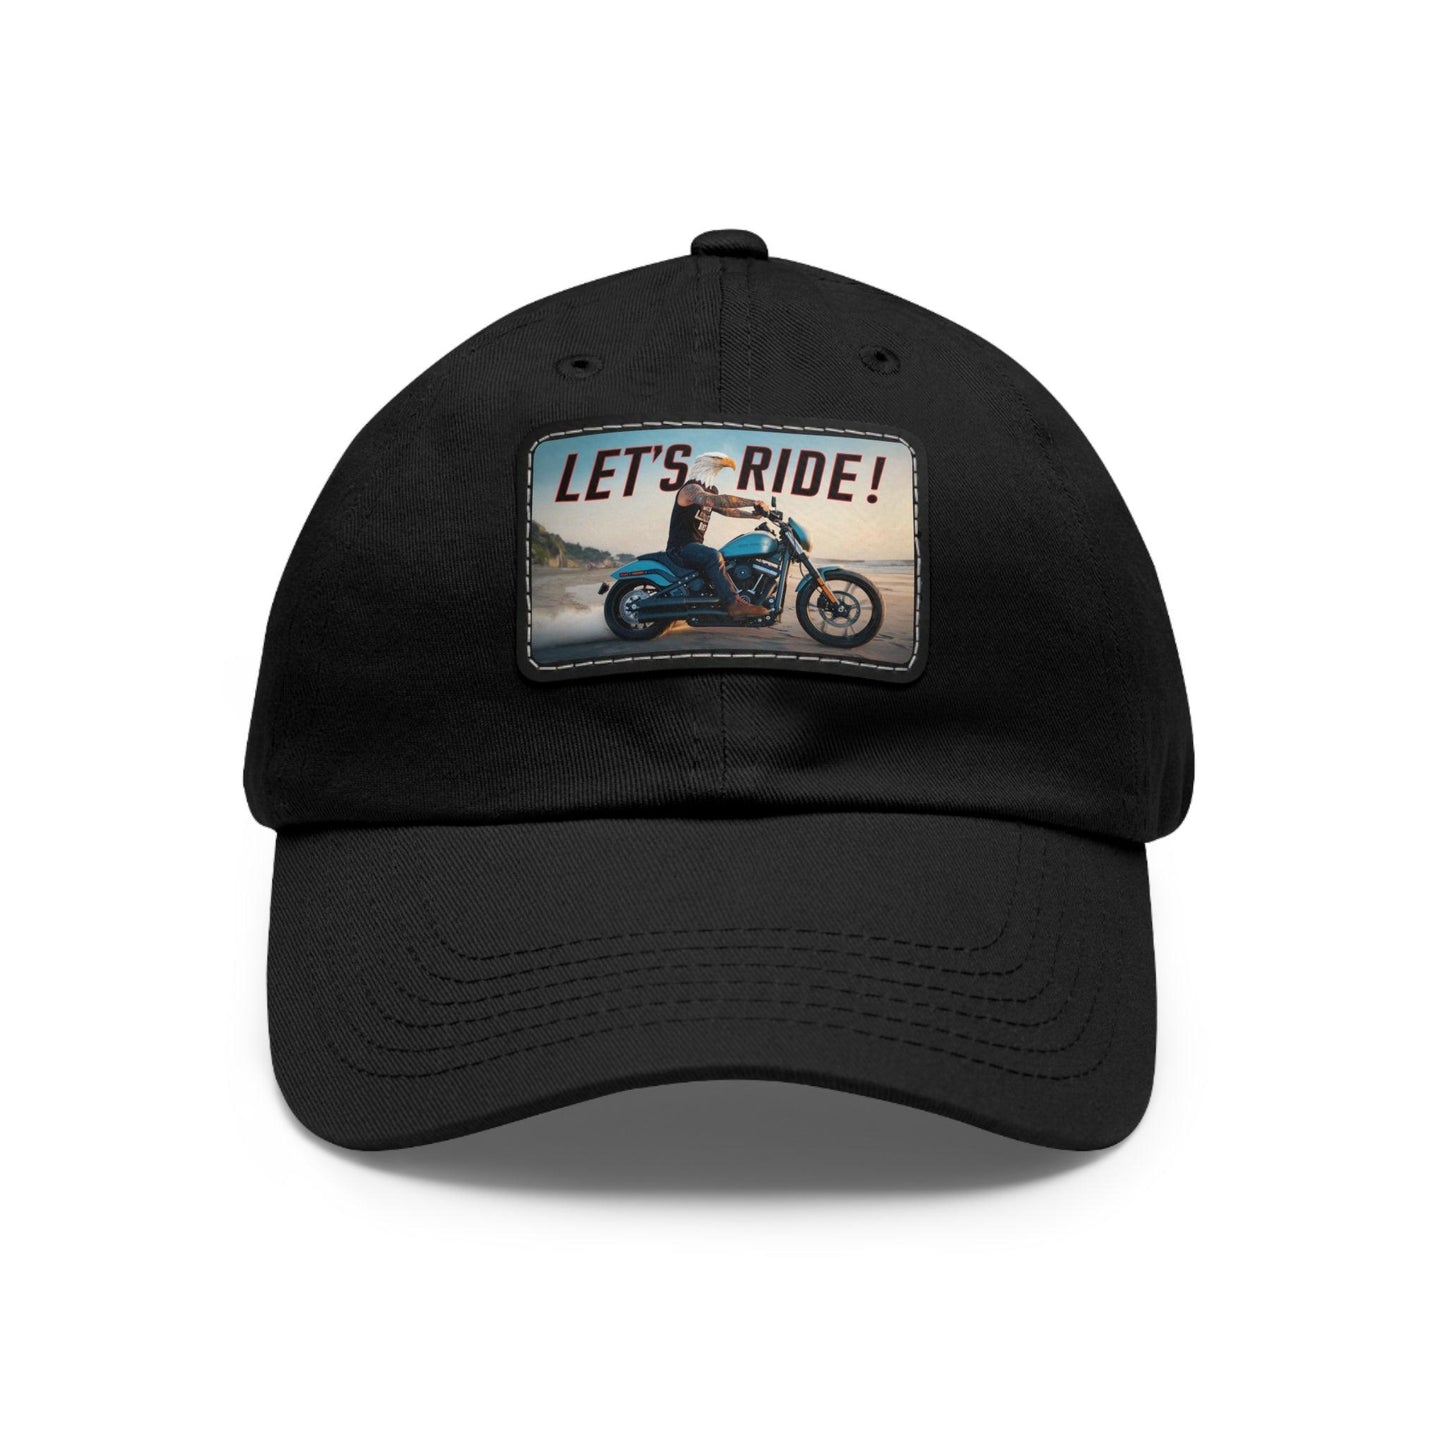 Let's Ride Eagle Man Riding Motorcycle Cap, Dad Hat with Leather Patch (Rectangle) - Coastal Collections